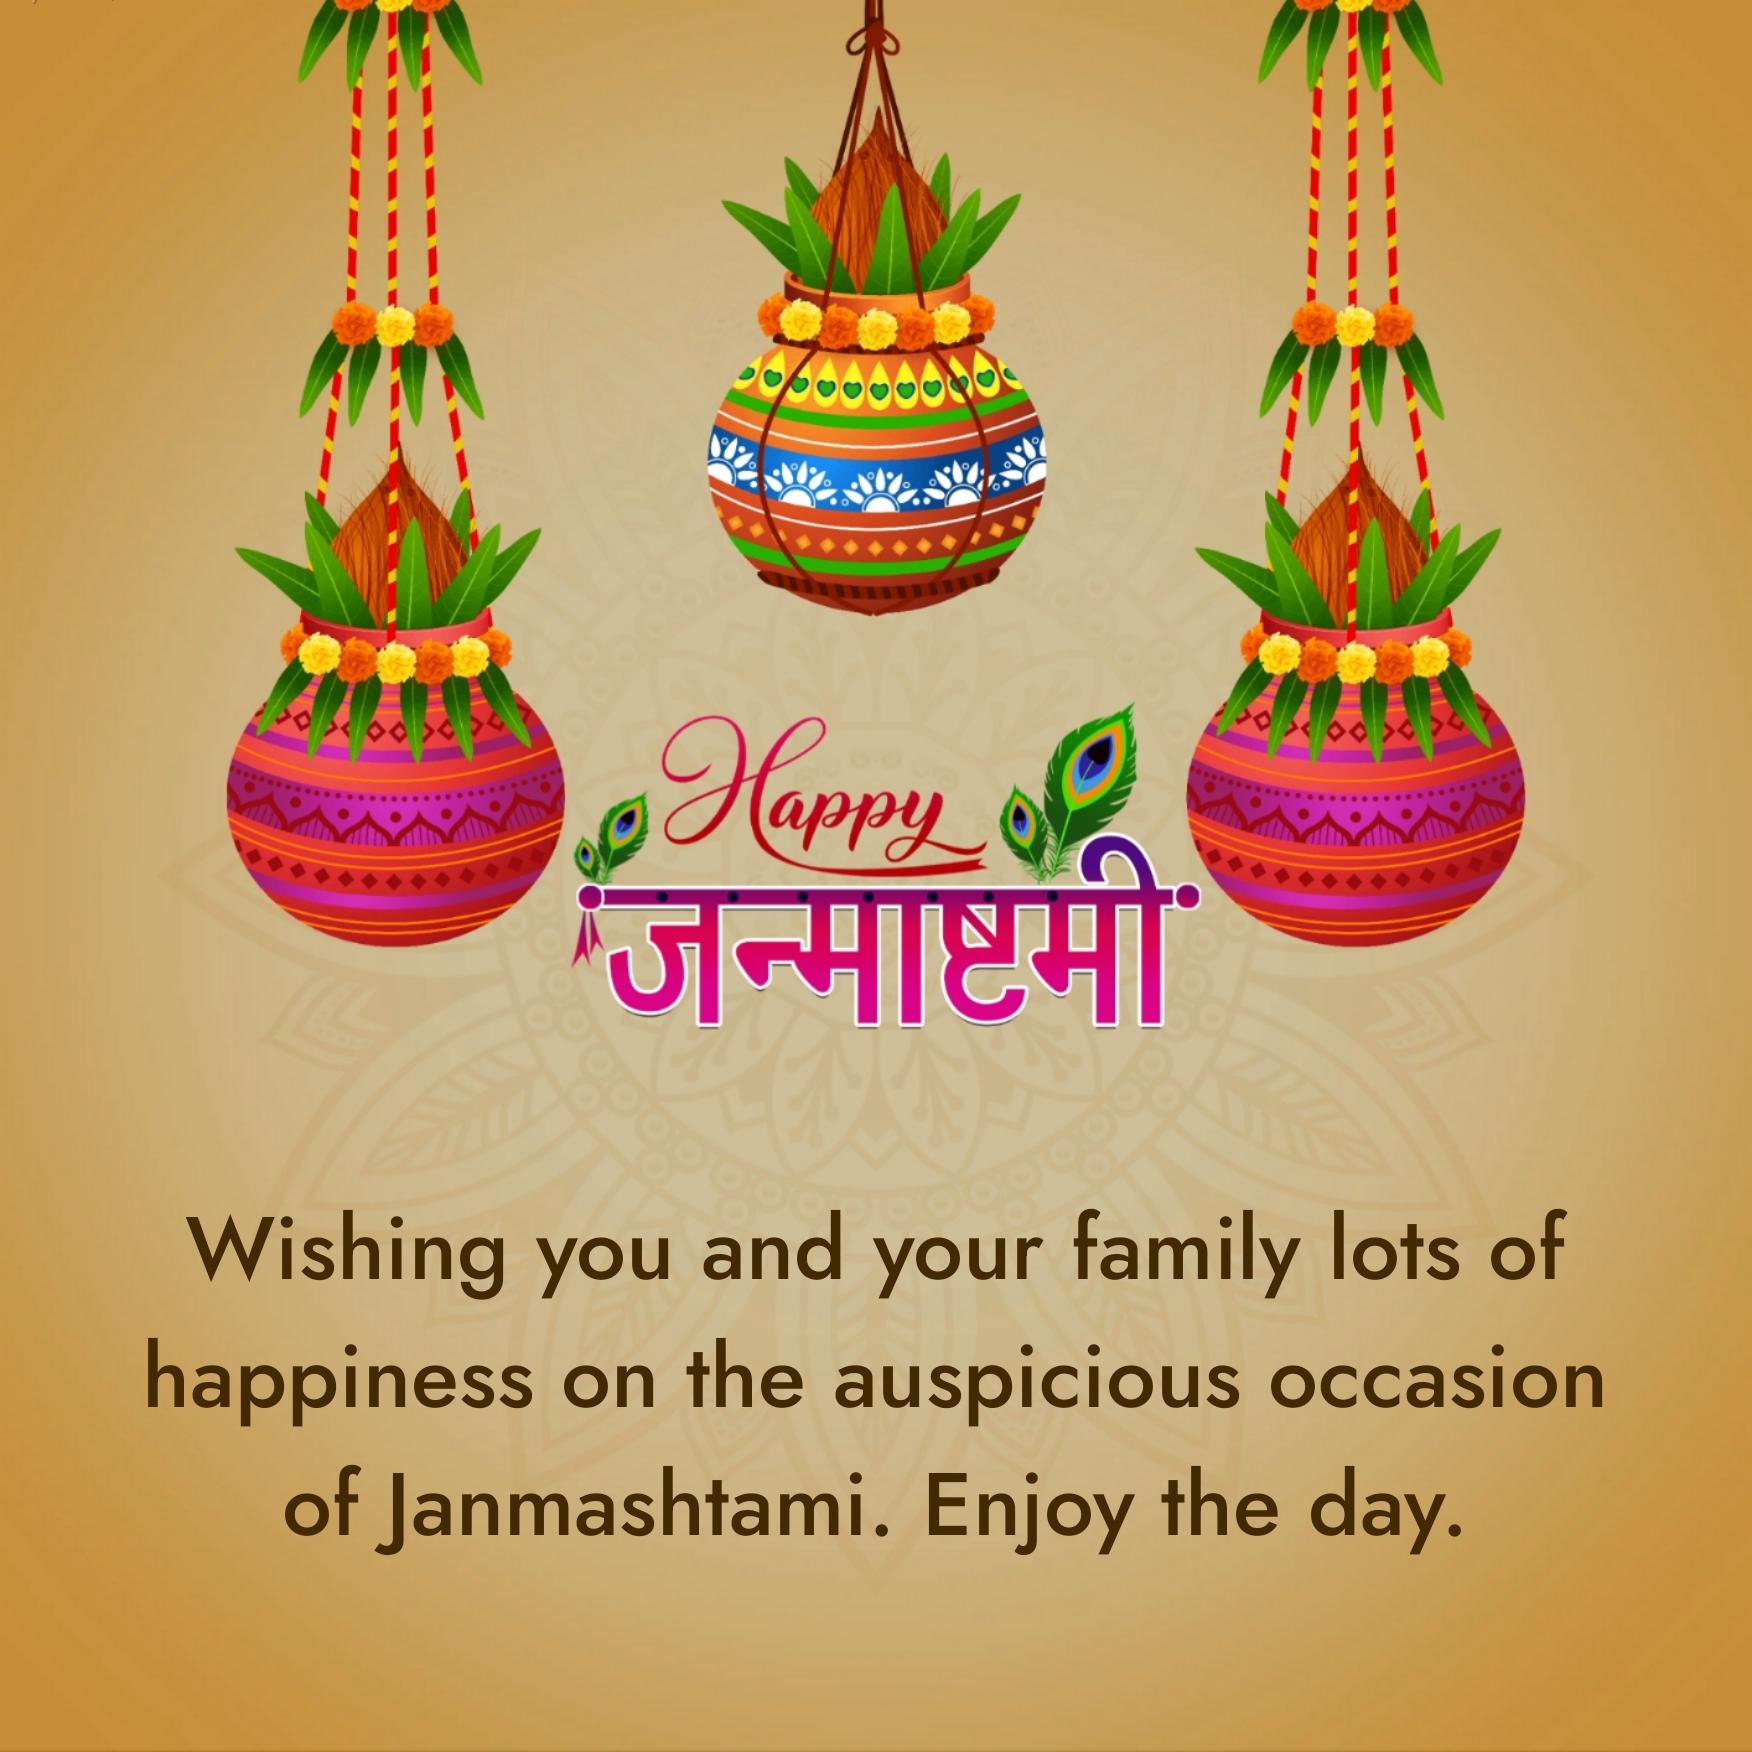 Wishing you and your family lots of happiness on the auspicious occasion